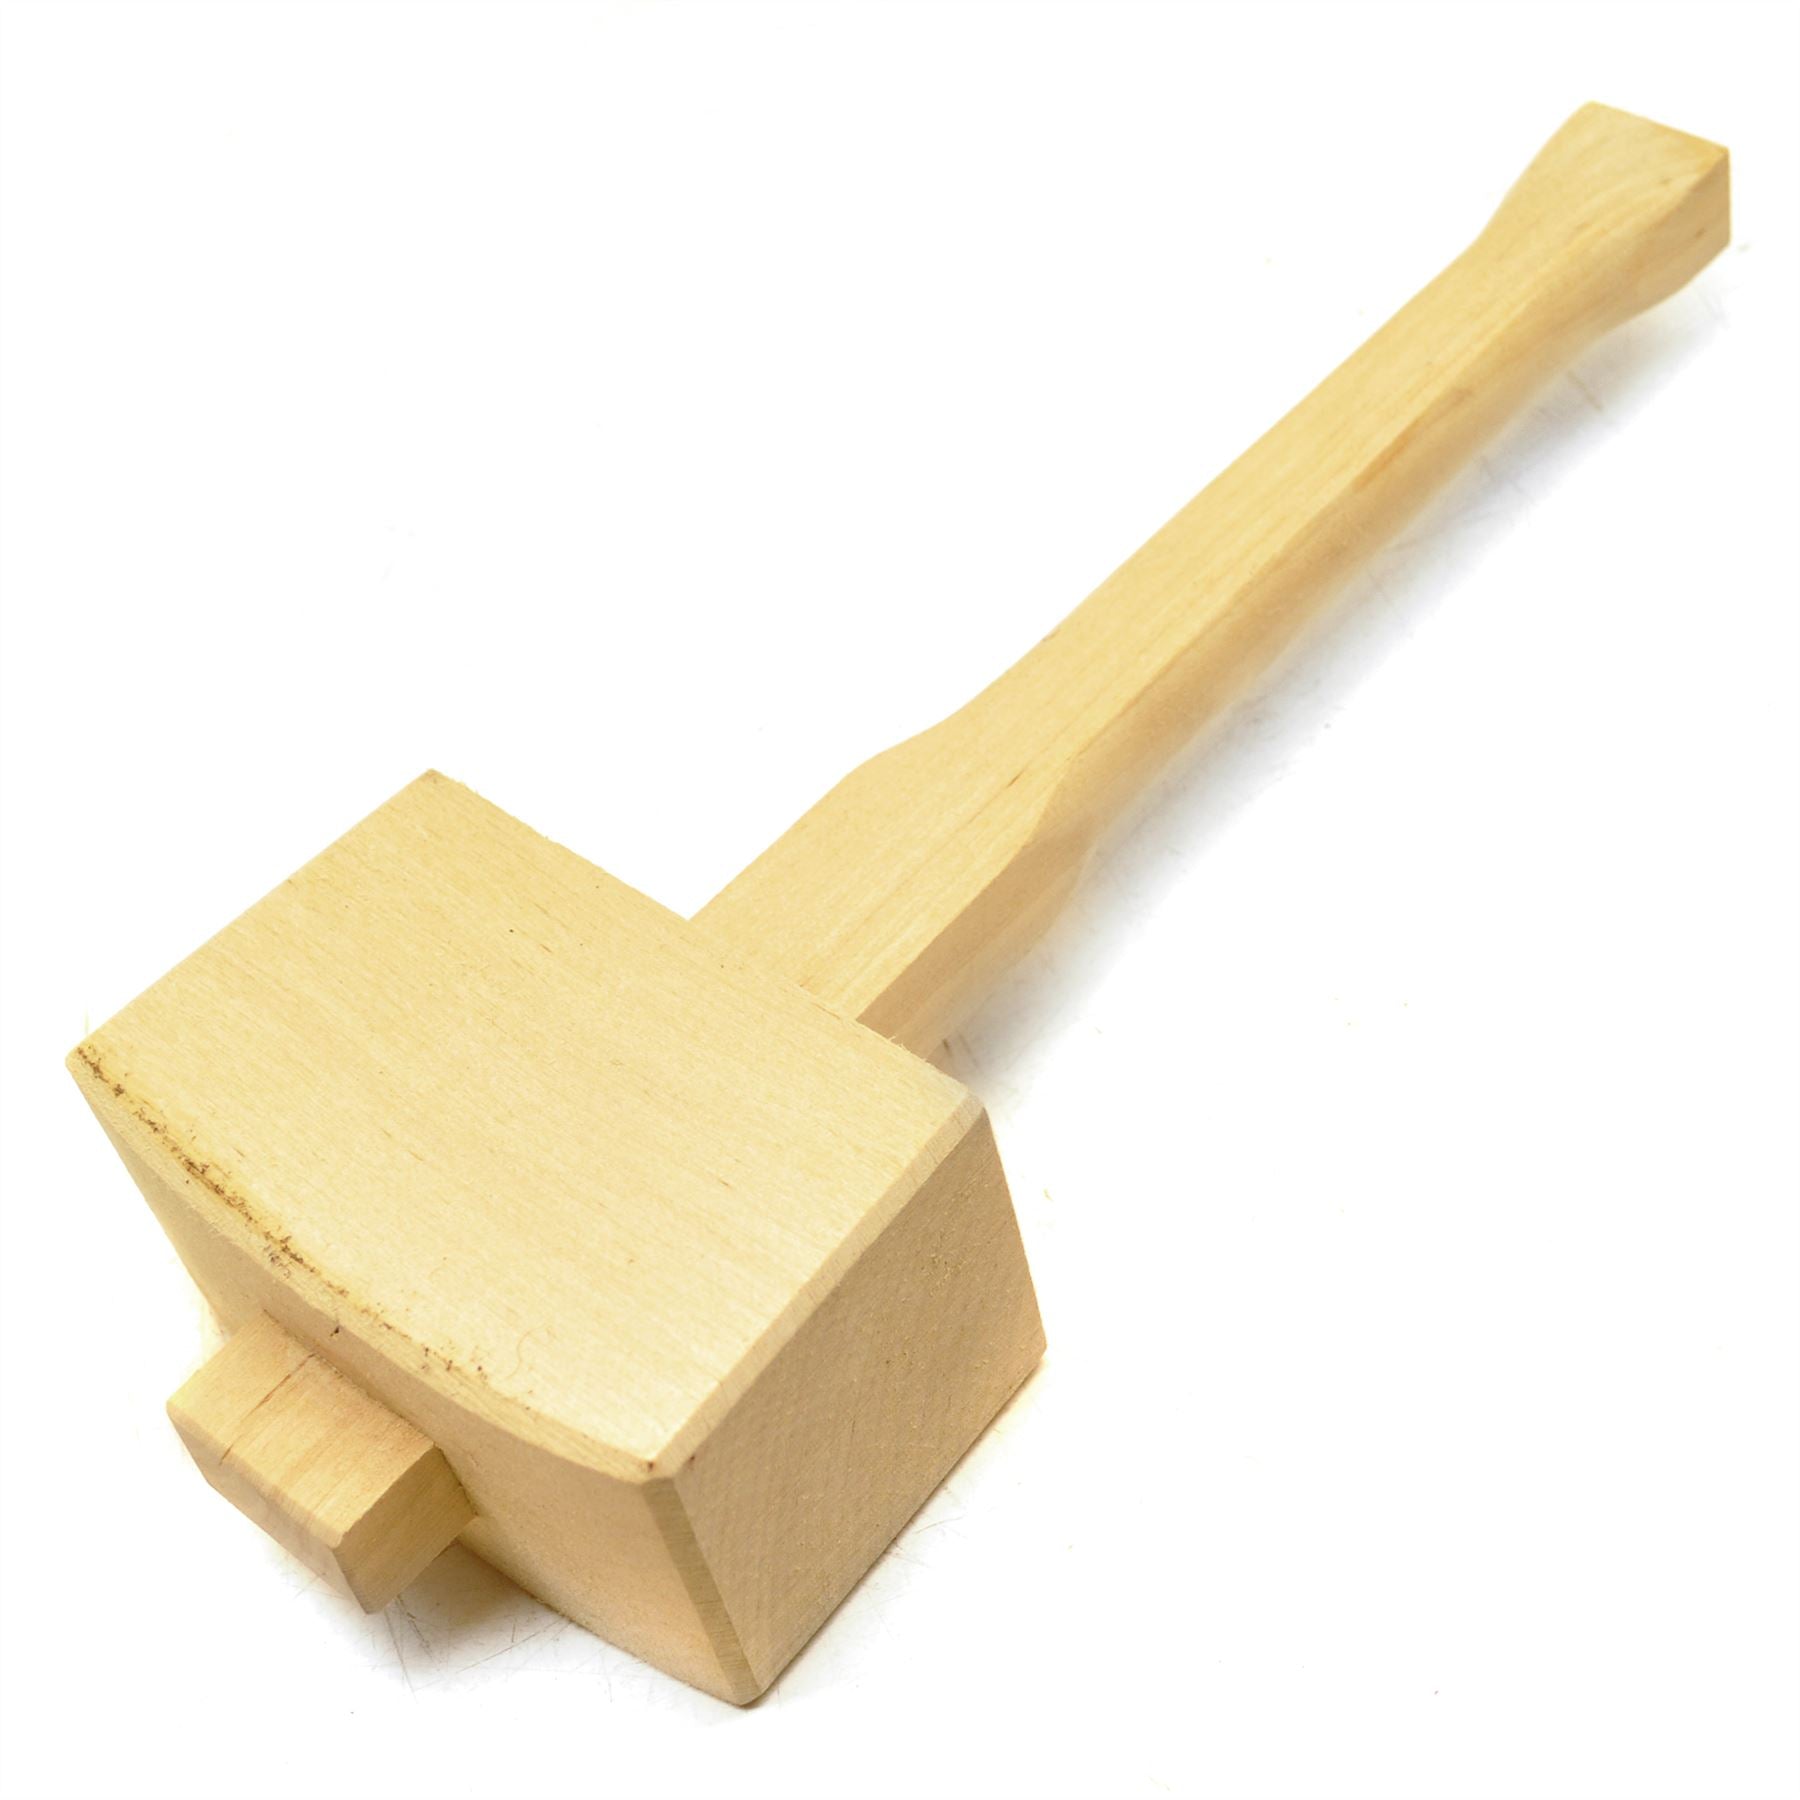 Wooden Mallet Hammer for Tent Pegs Chisels Woodworking Sil195